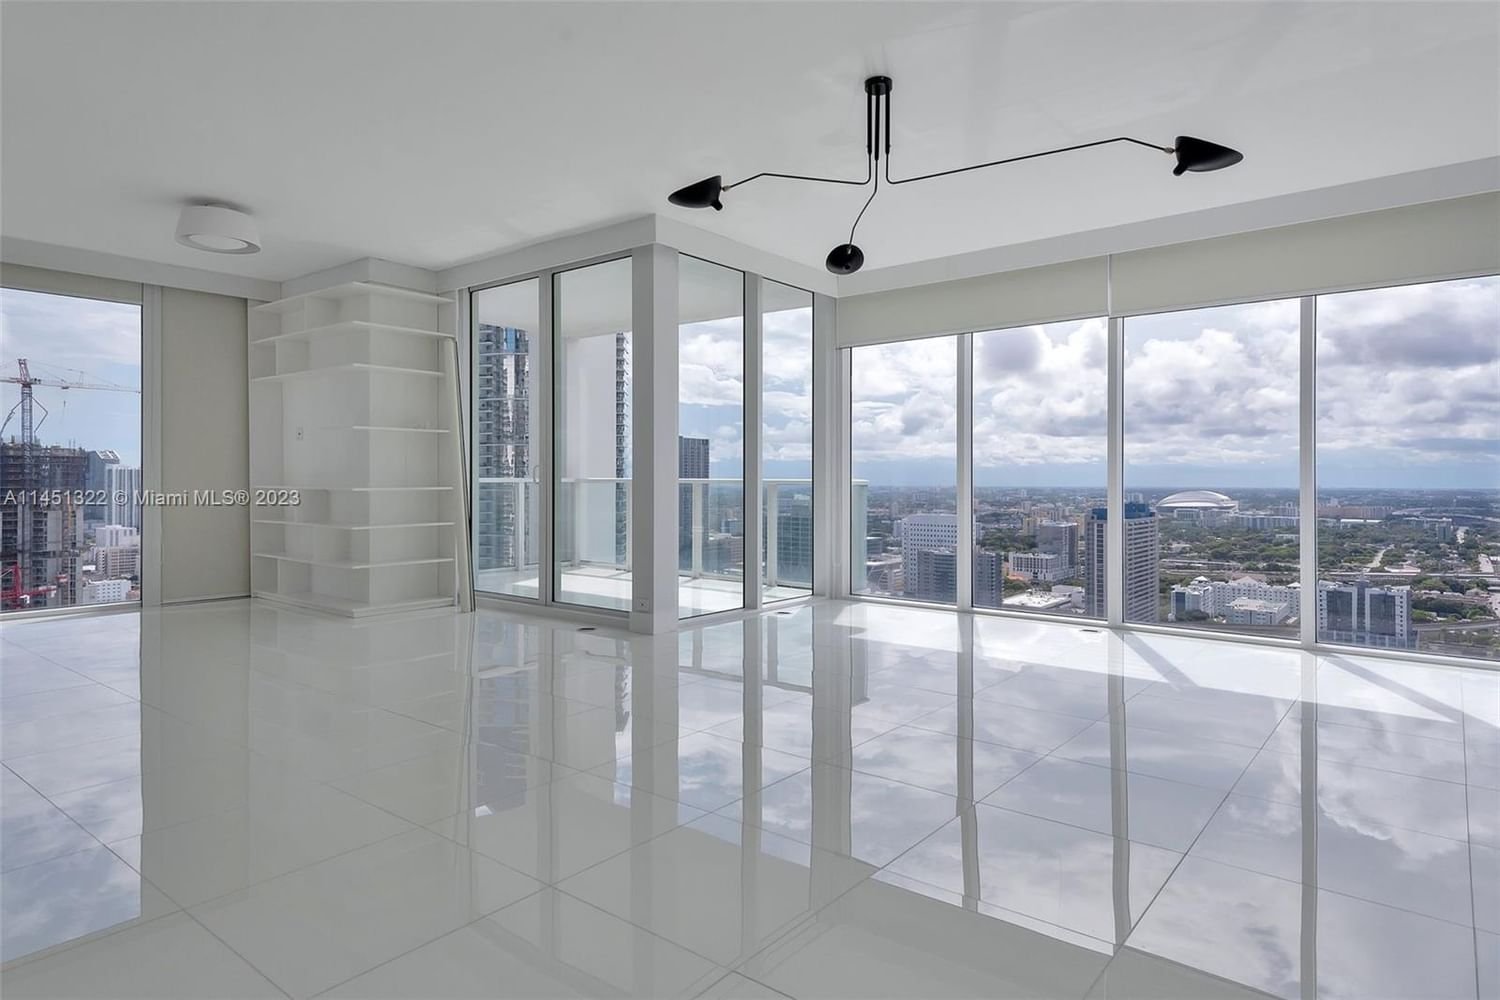 Real estate property located at 1040 Biscayne Blvd #3307, Miami-Dade County, TEN MUSEUM PK RESIDENTIAL, Miami, FL